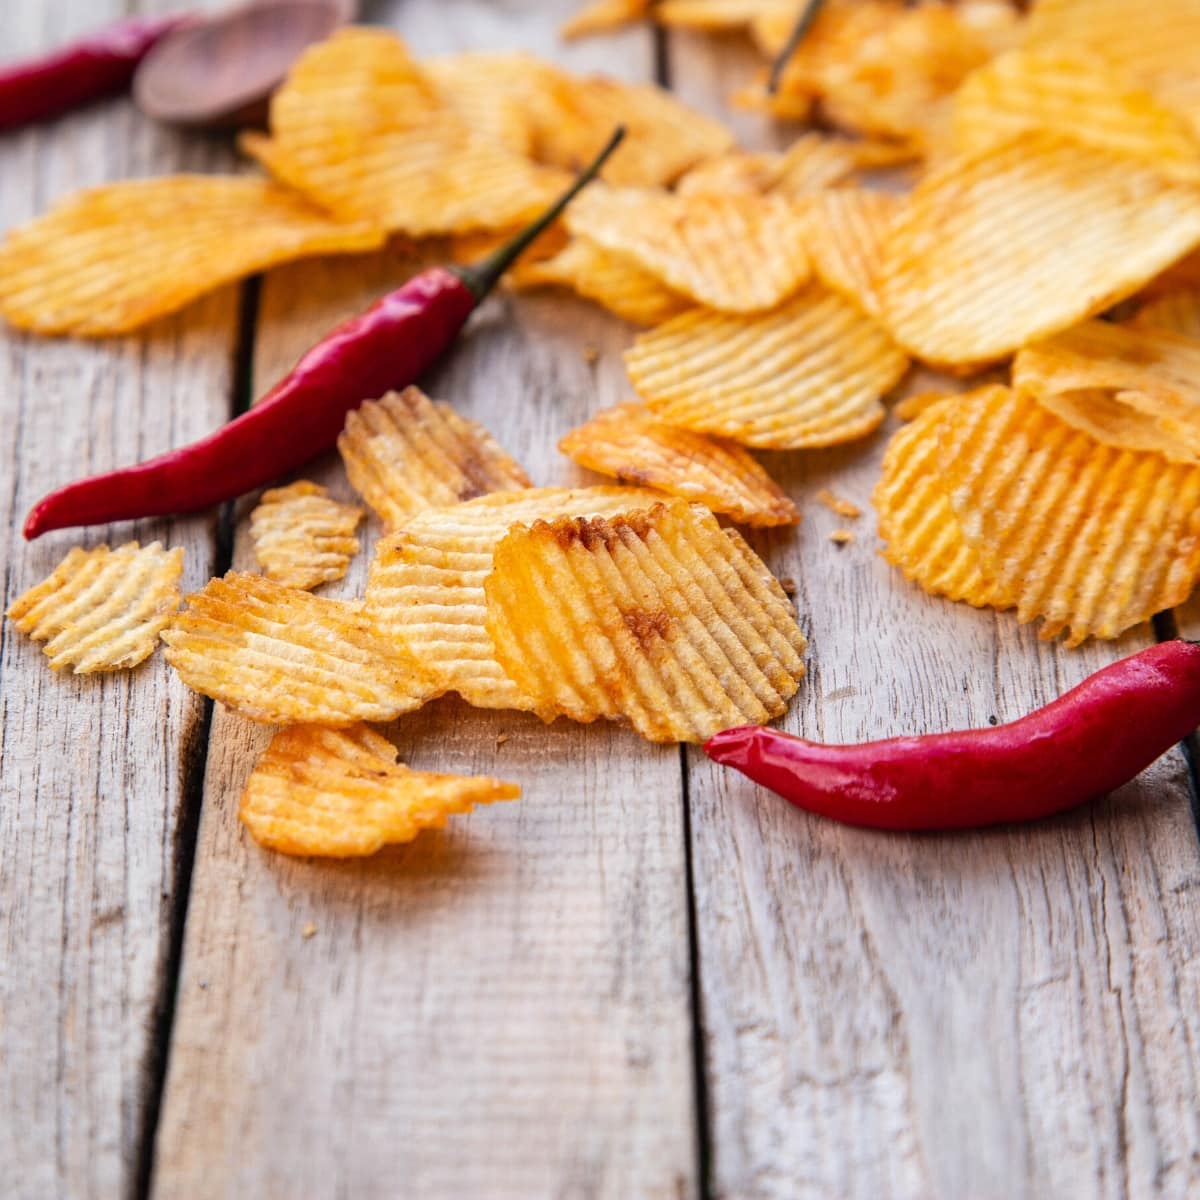 Potato chips and red chiles resting on a wooden table.